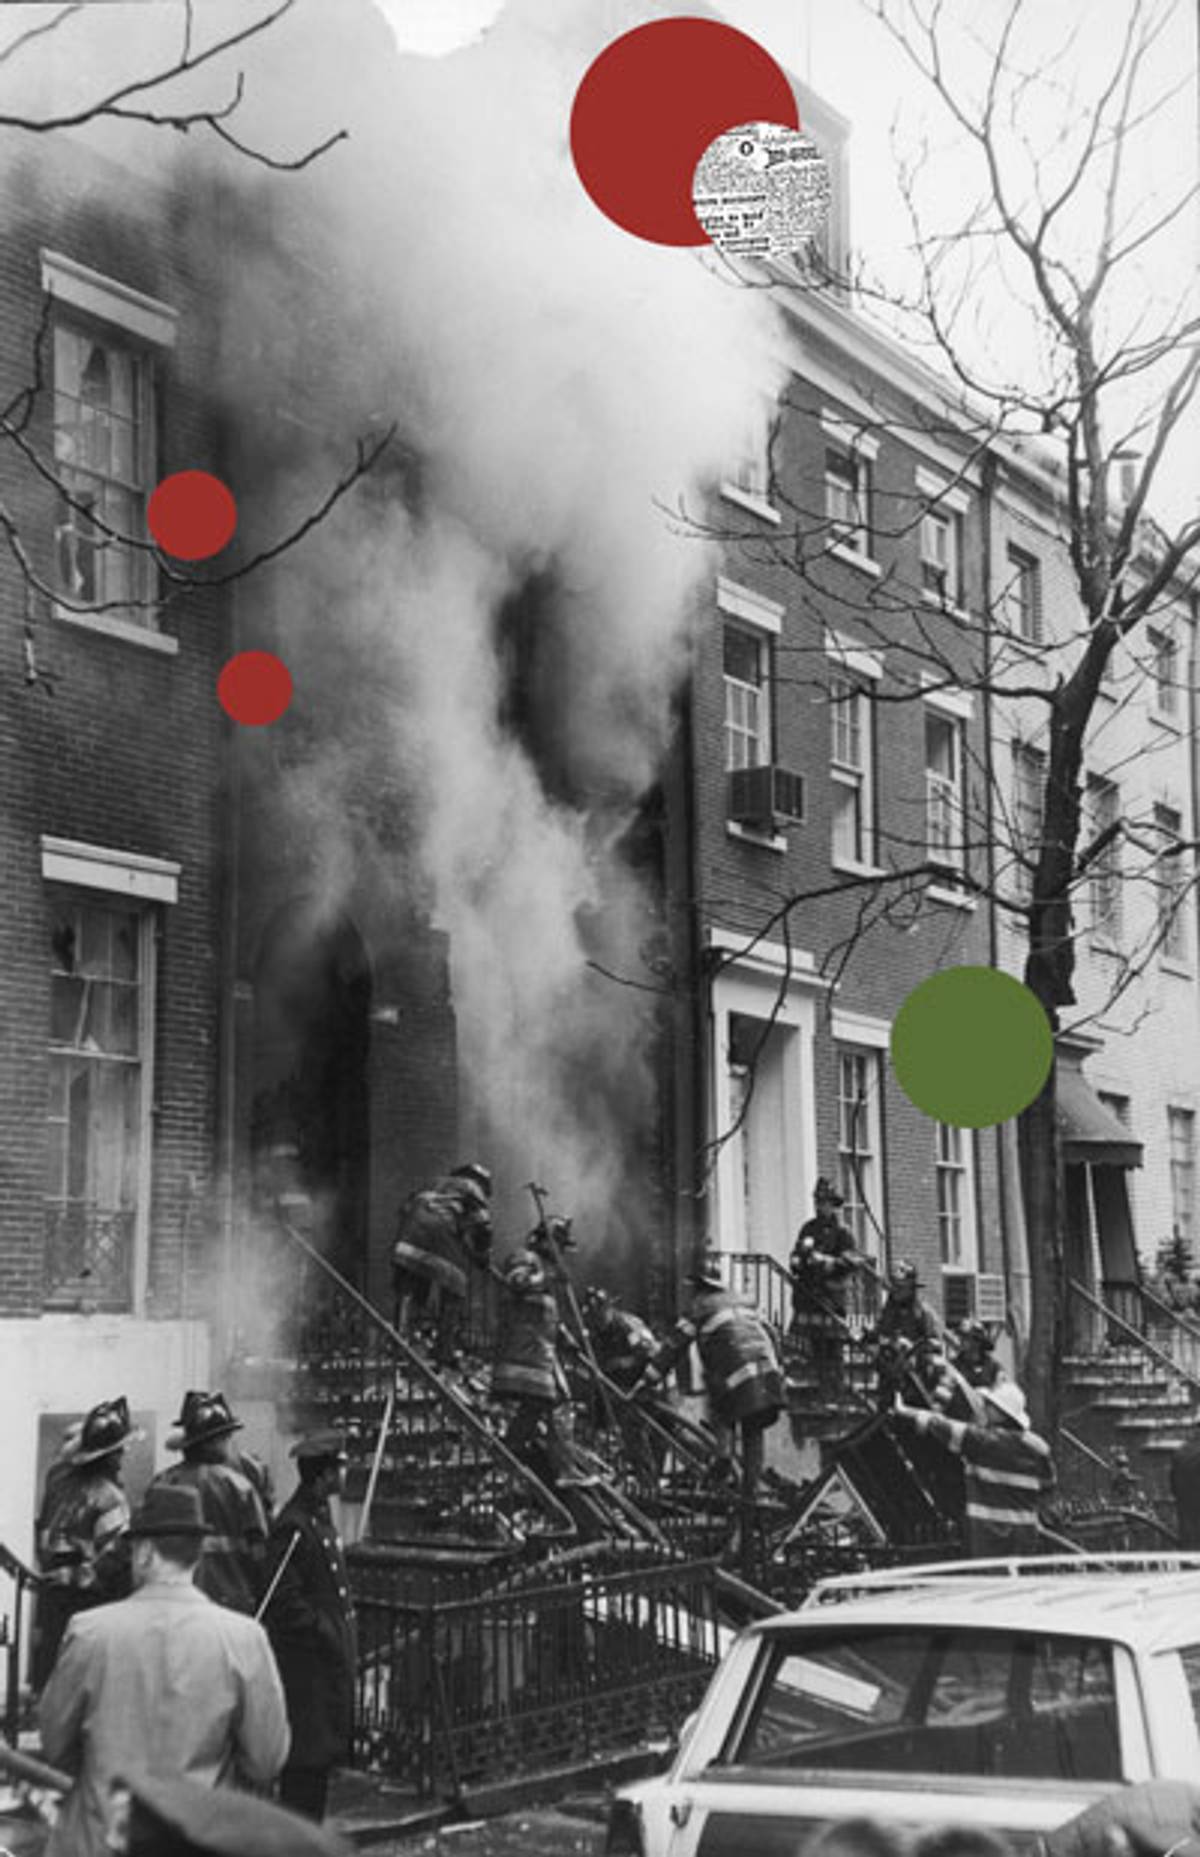 Firefighters battle the smoke and flames from an explosion in the basement of 18 West 11th St., New York City, March 6, 1970. The Greenwich Village house was being used by members of the Weatherman (later Weather Underground) and the explosion, caused by the accidental detonation of a bomb during its construction, resulted in three deaths. 